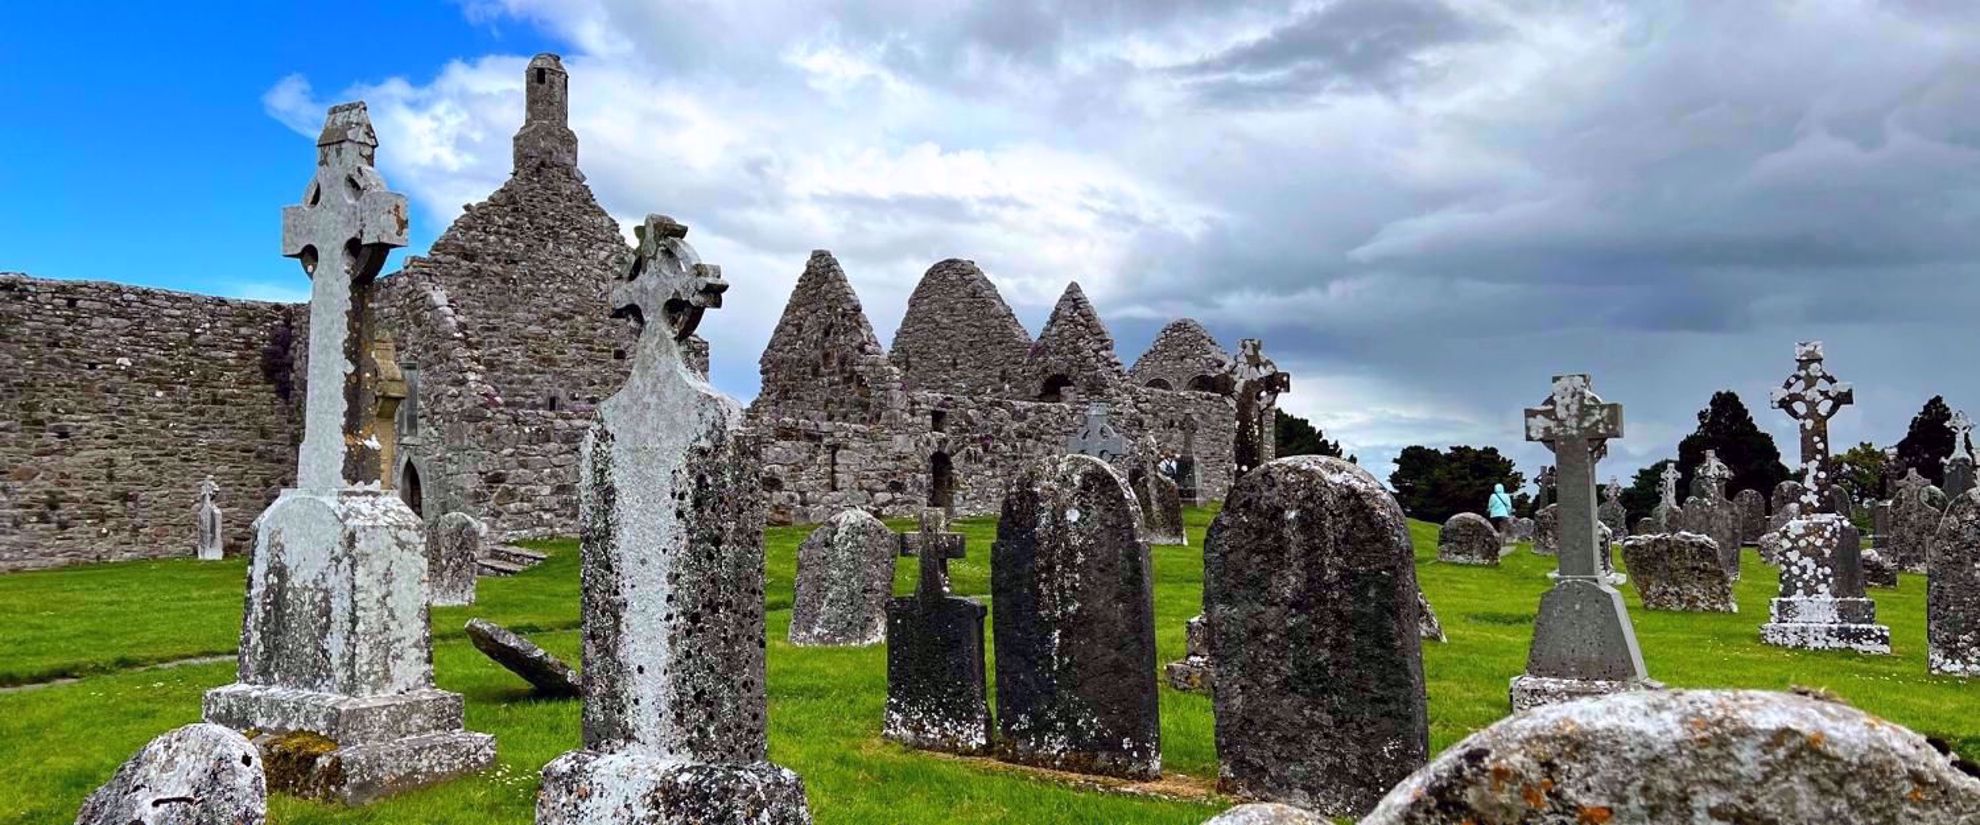 Travel to discover your Irish heritage